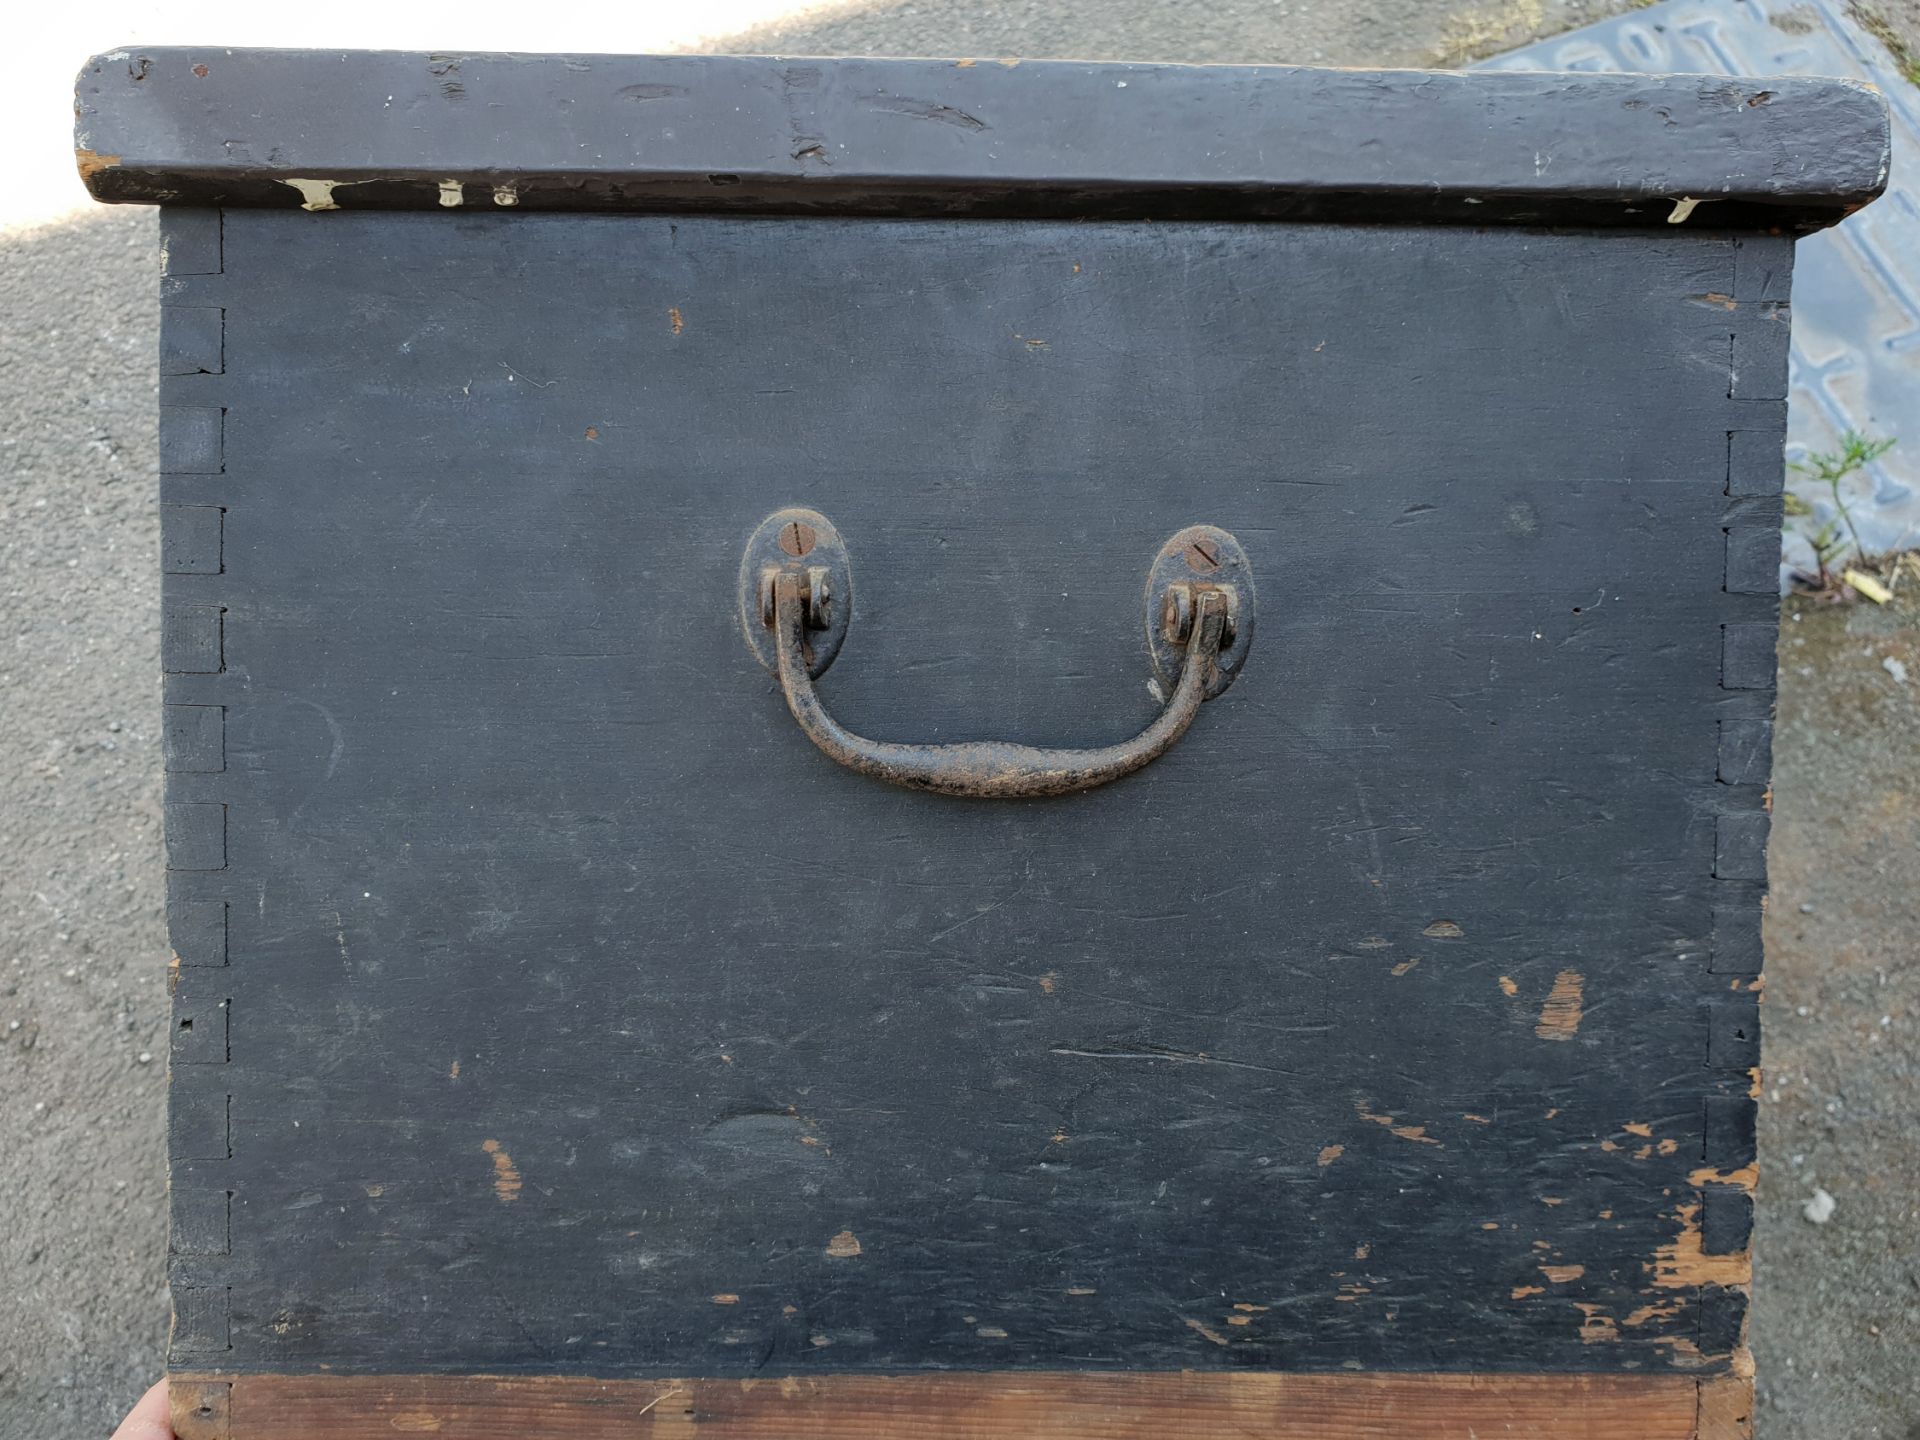 Antique Pine Box or Chest Painted Black - Image 2 of 2